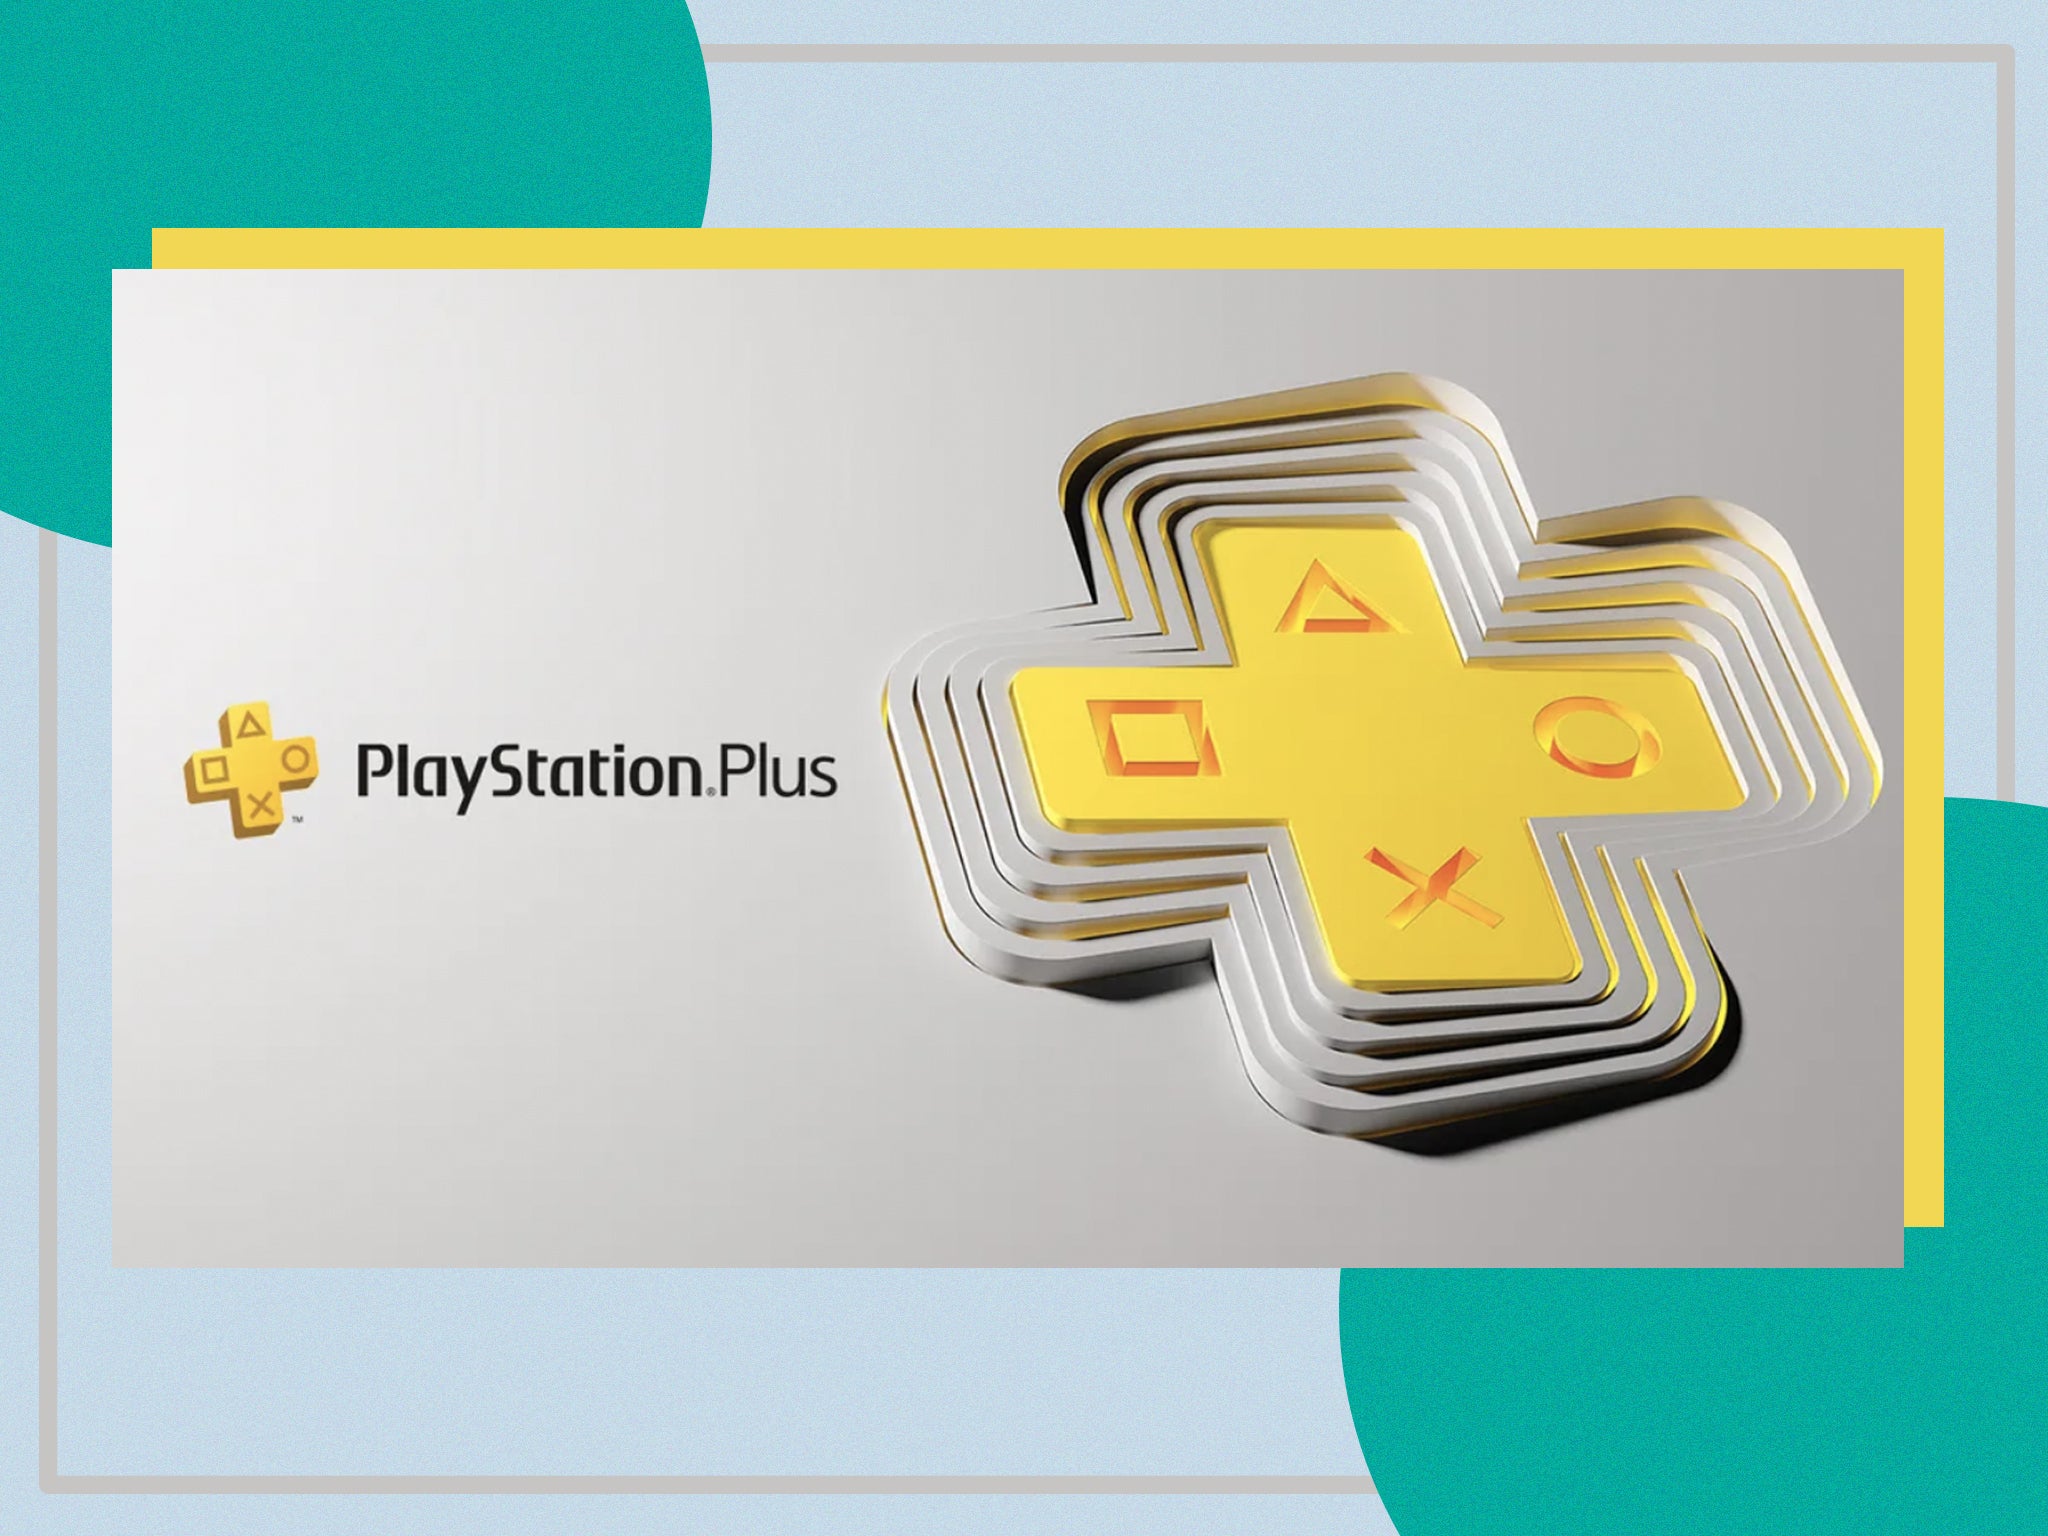 The premium tier will give you access to games from the PS1 era